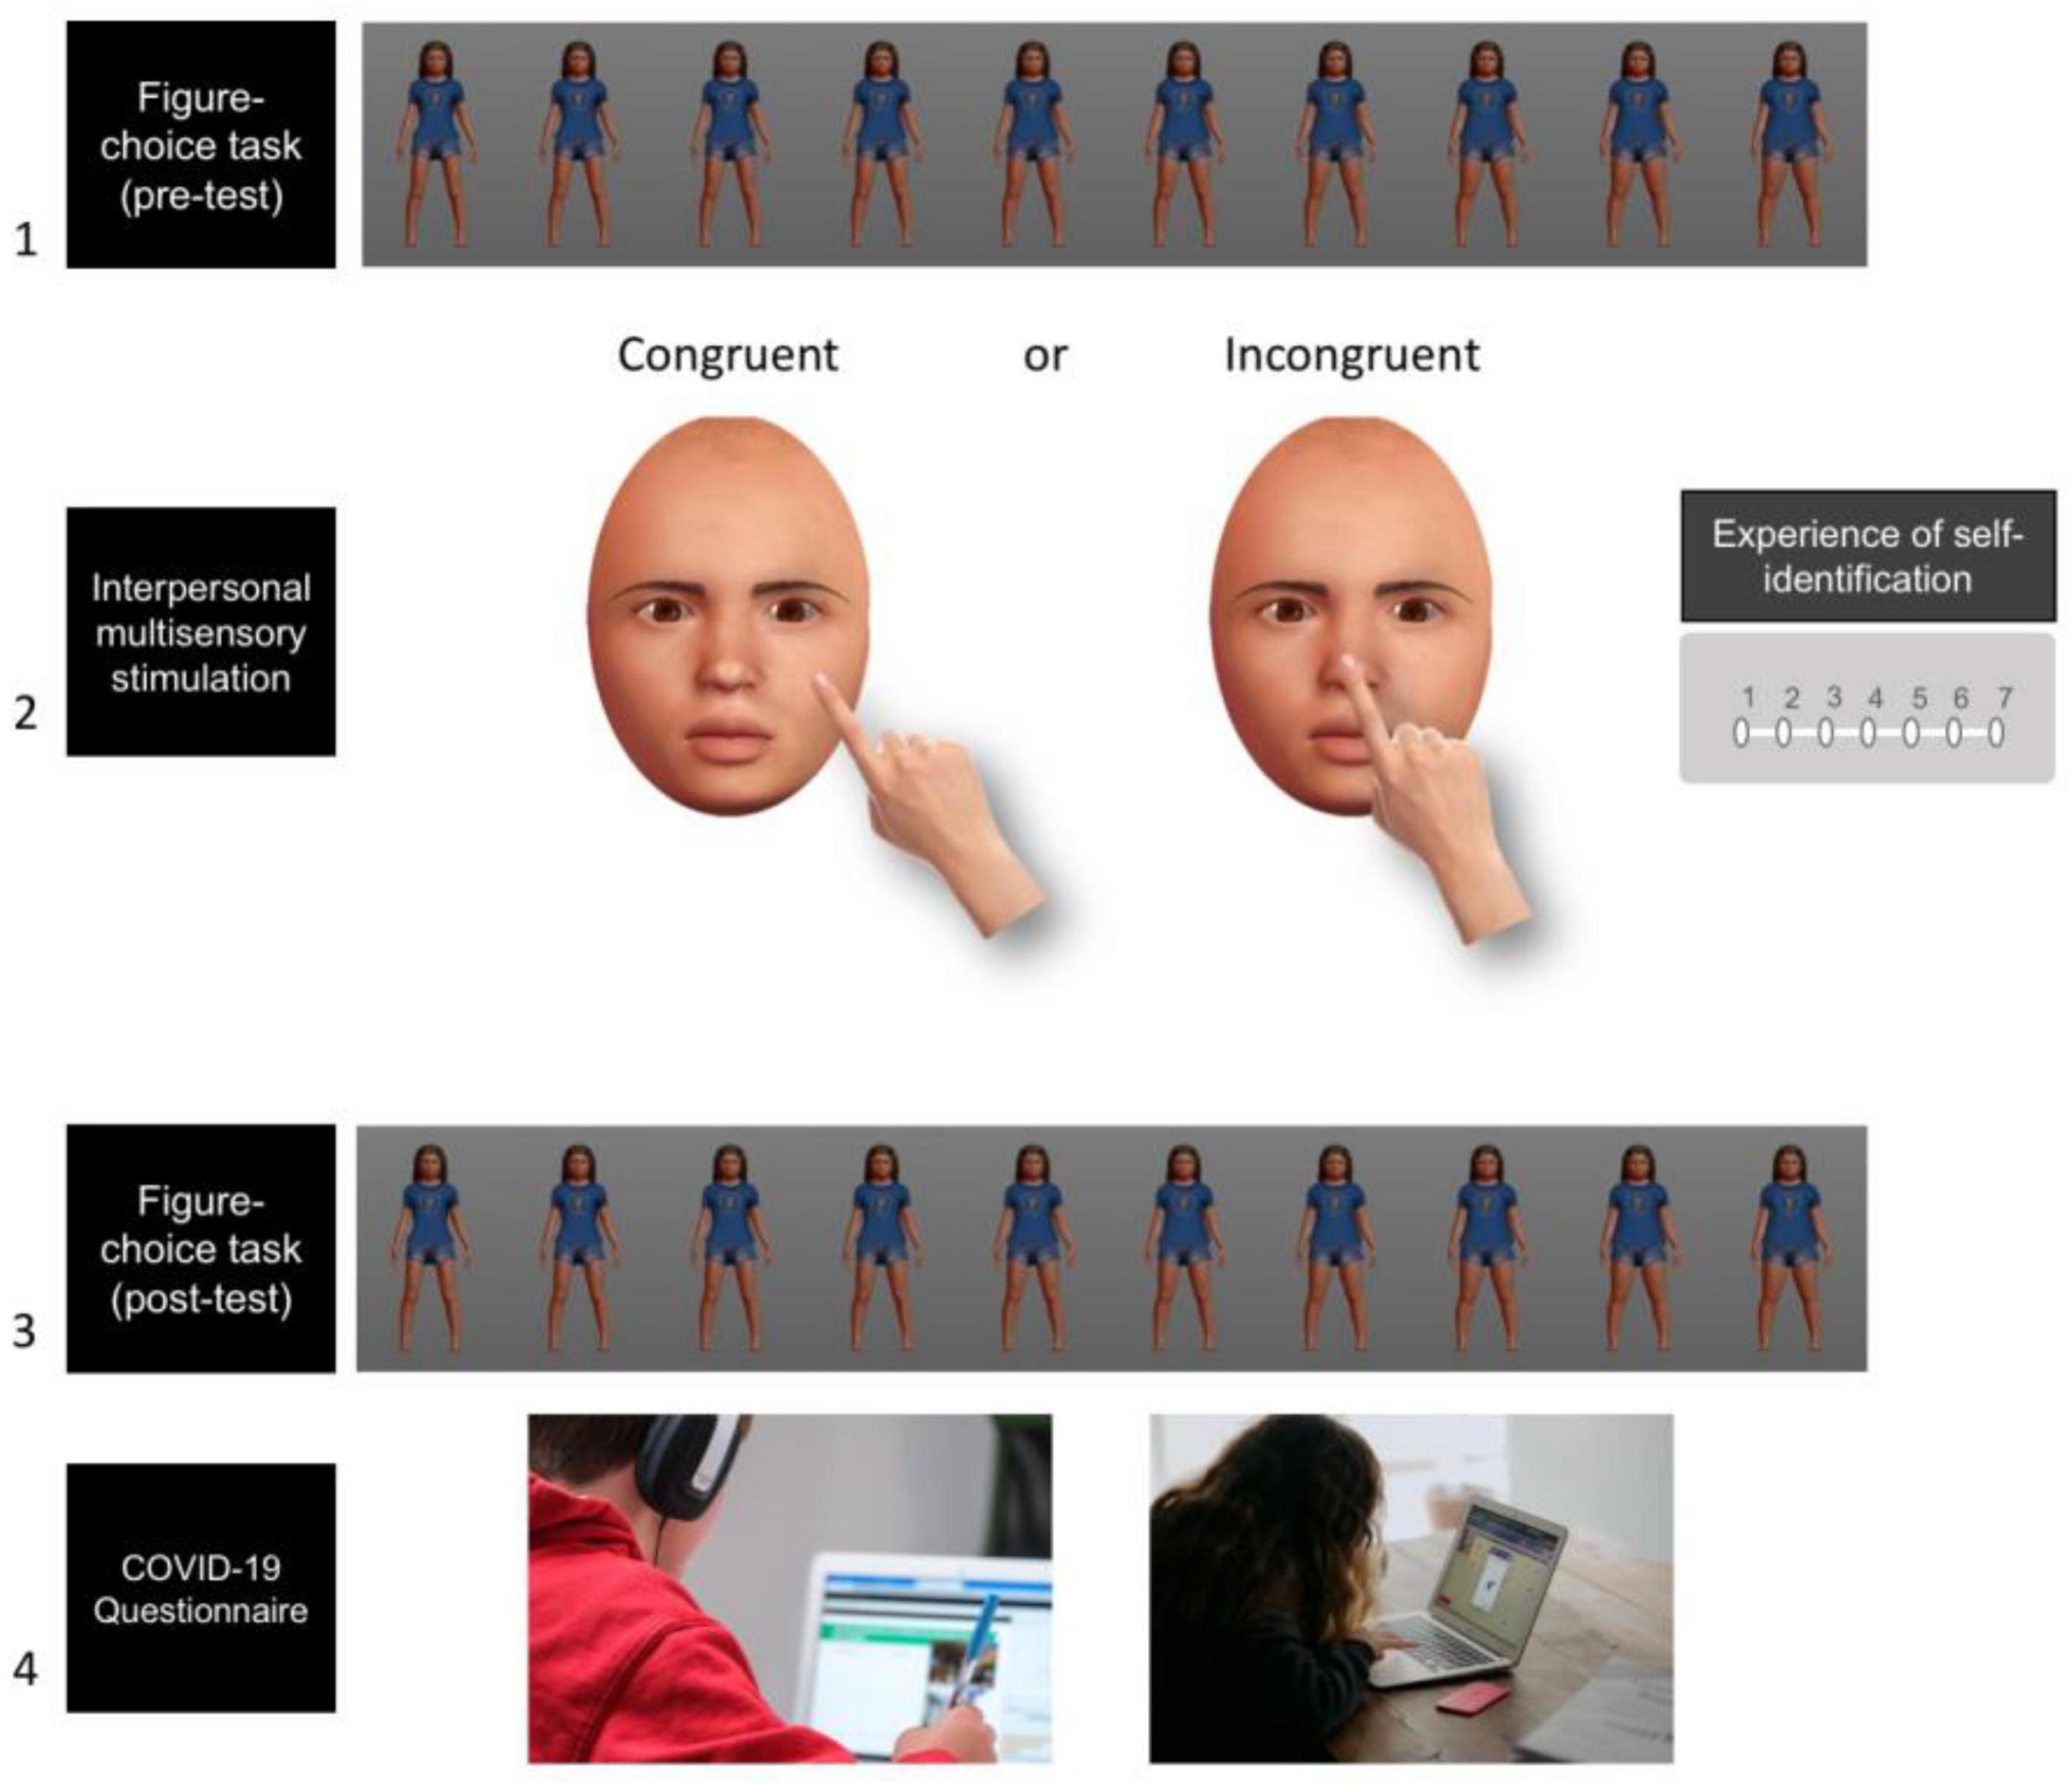 Short-term visual deprivation boosts the flexibility of body representation